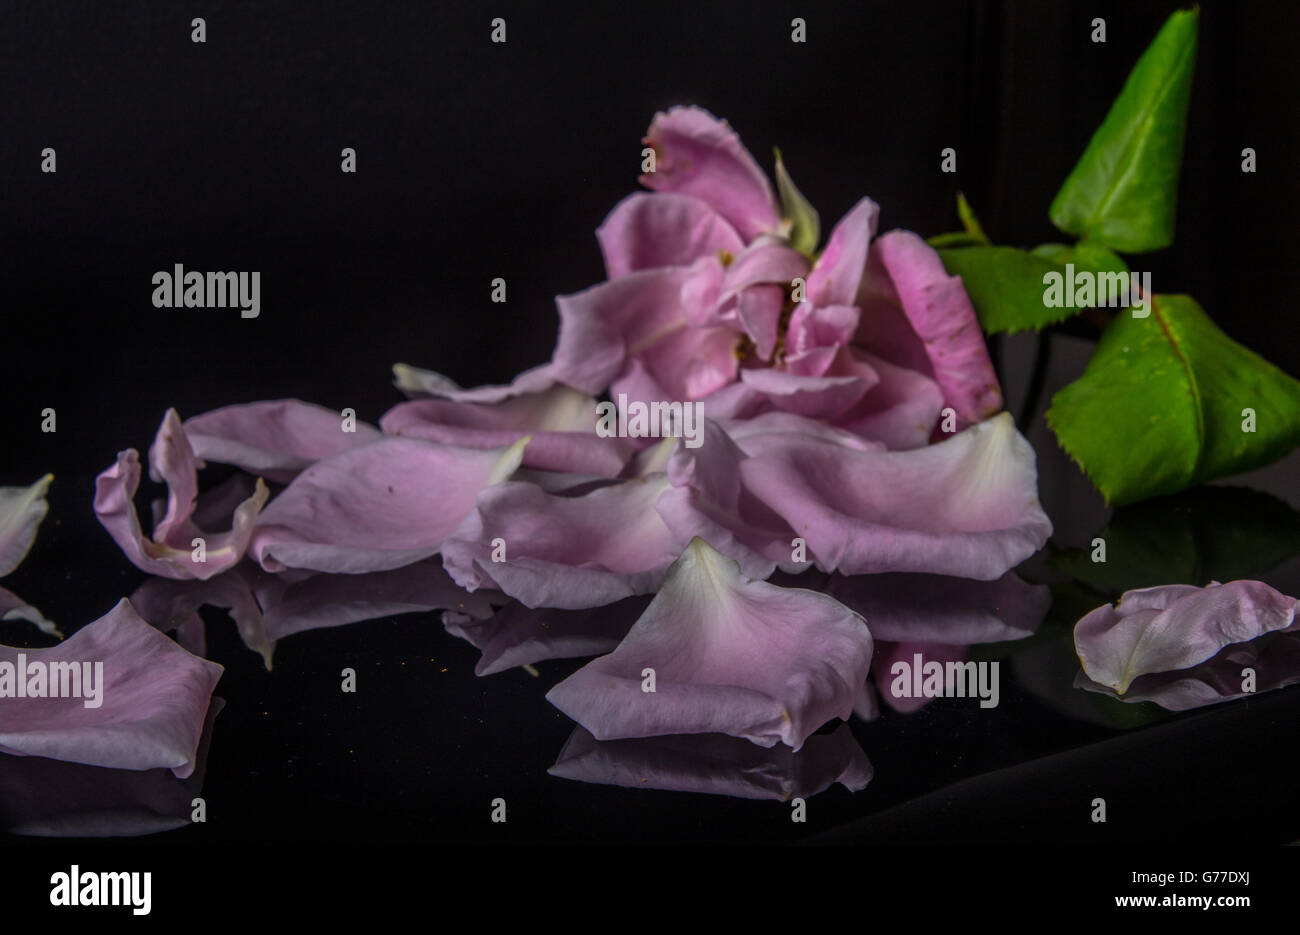 Pink rose with scattered petals against a black background Stock Photo